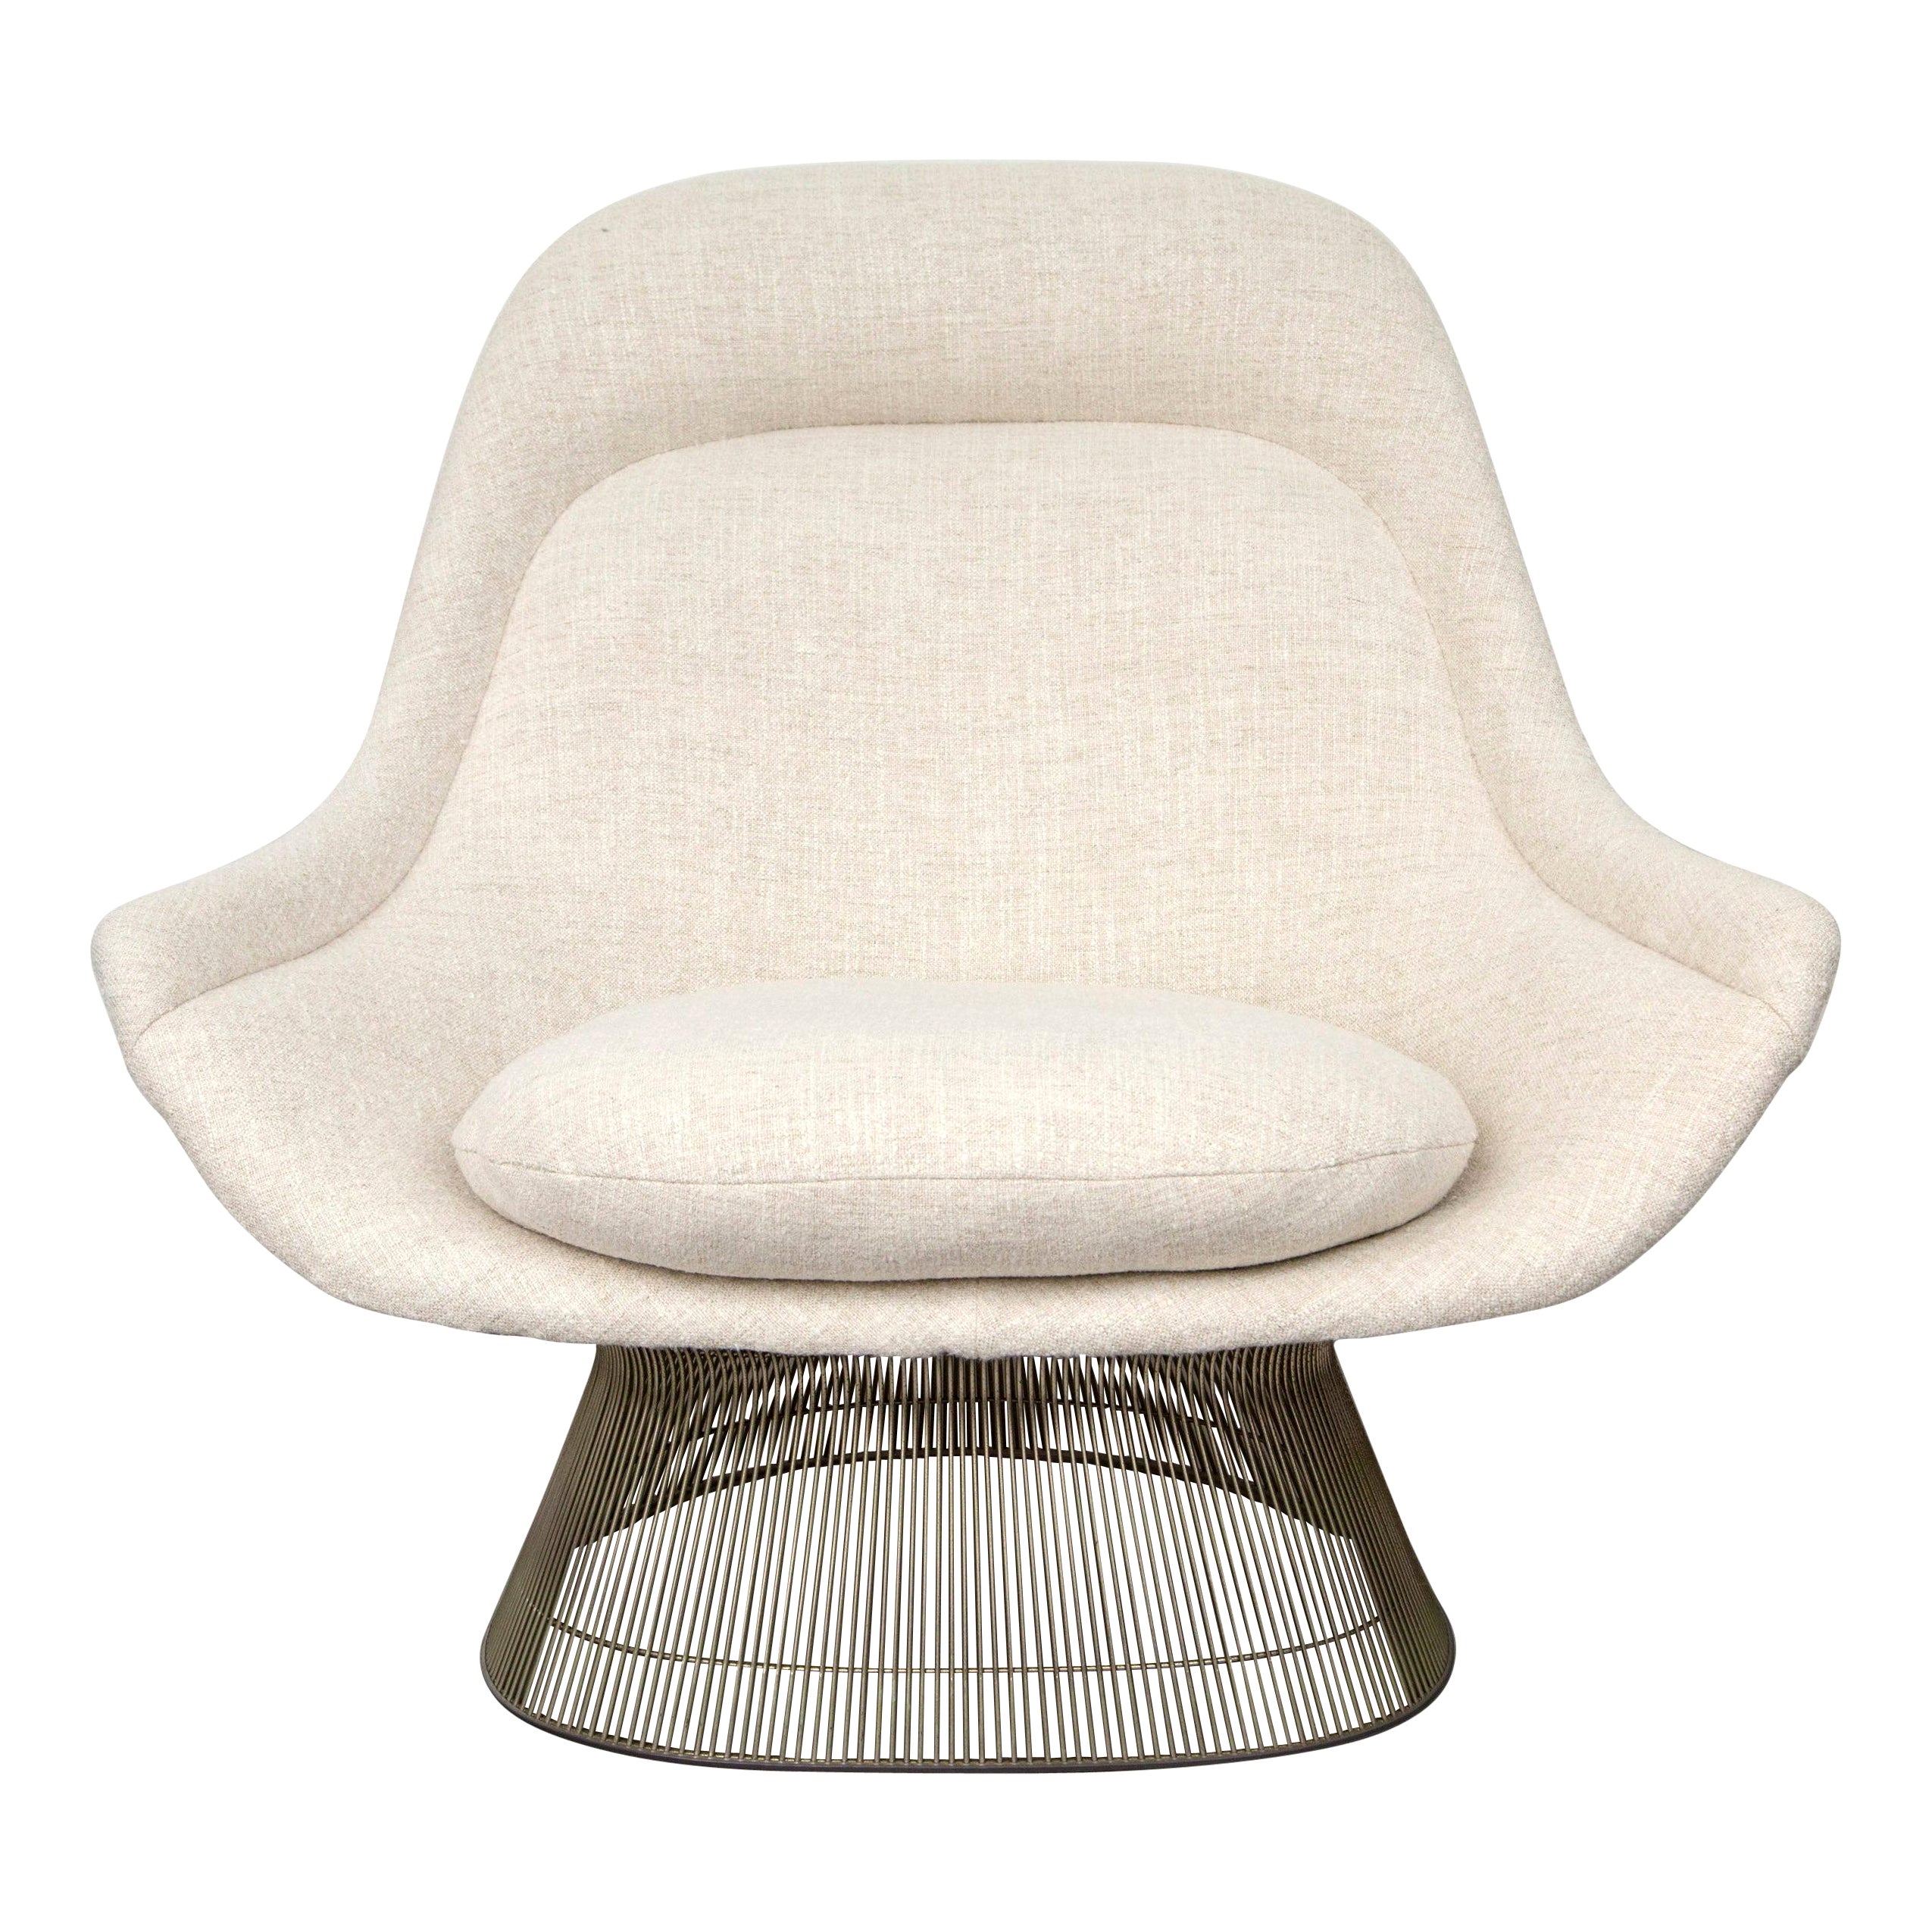 Warren Platner for Knoll Chair Reupholstered in New Maharam Wool Fabric